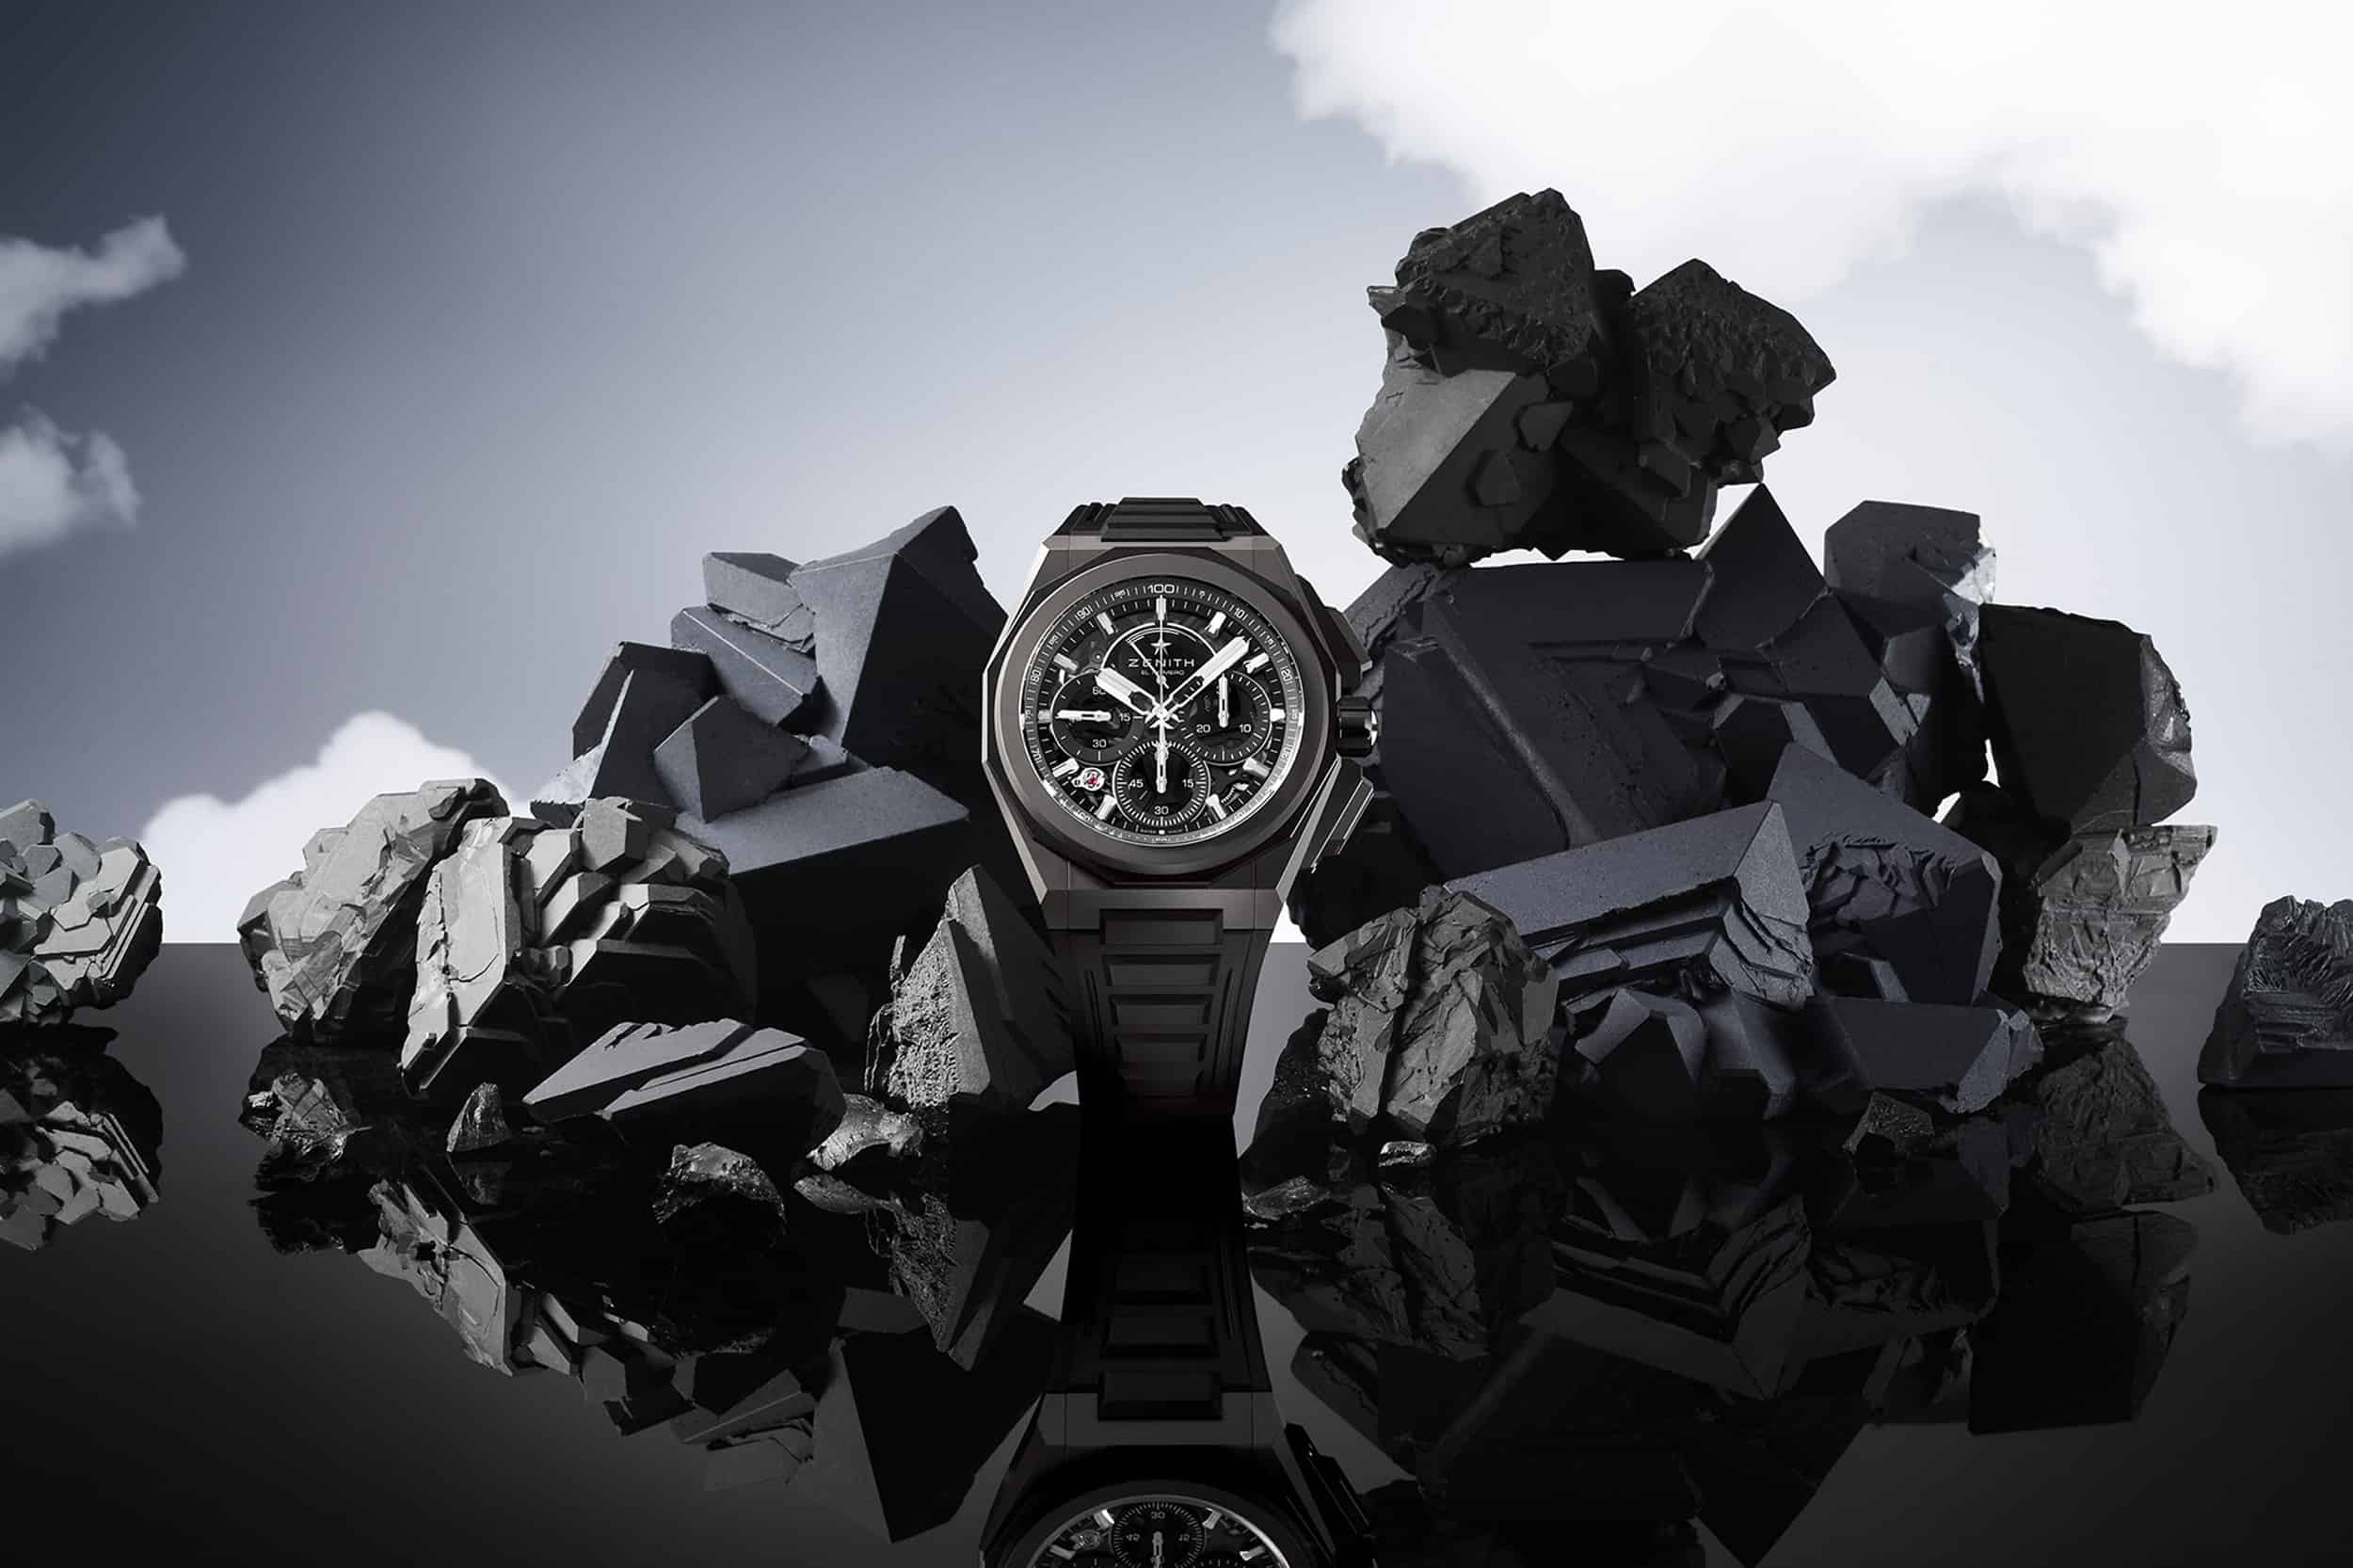 Zenith Defy Xtreme Power Reserve Limited Edition Watch